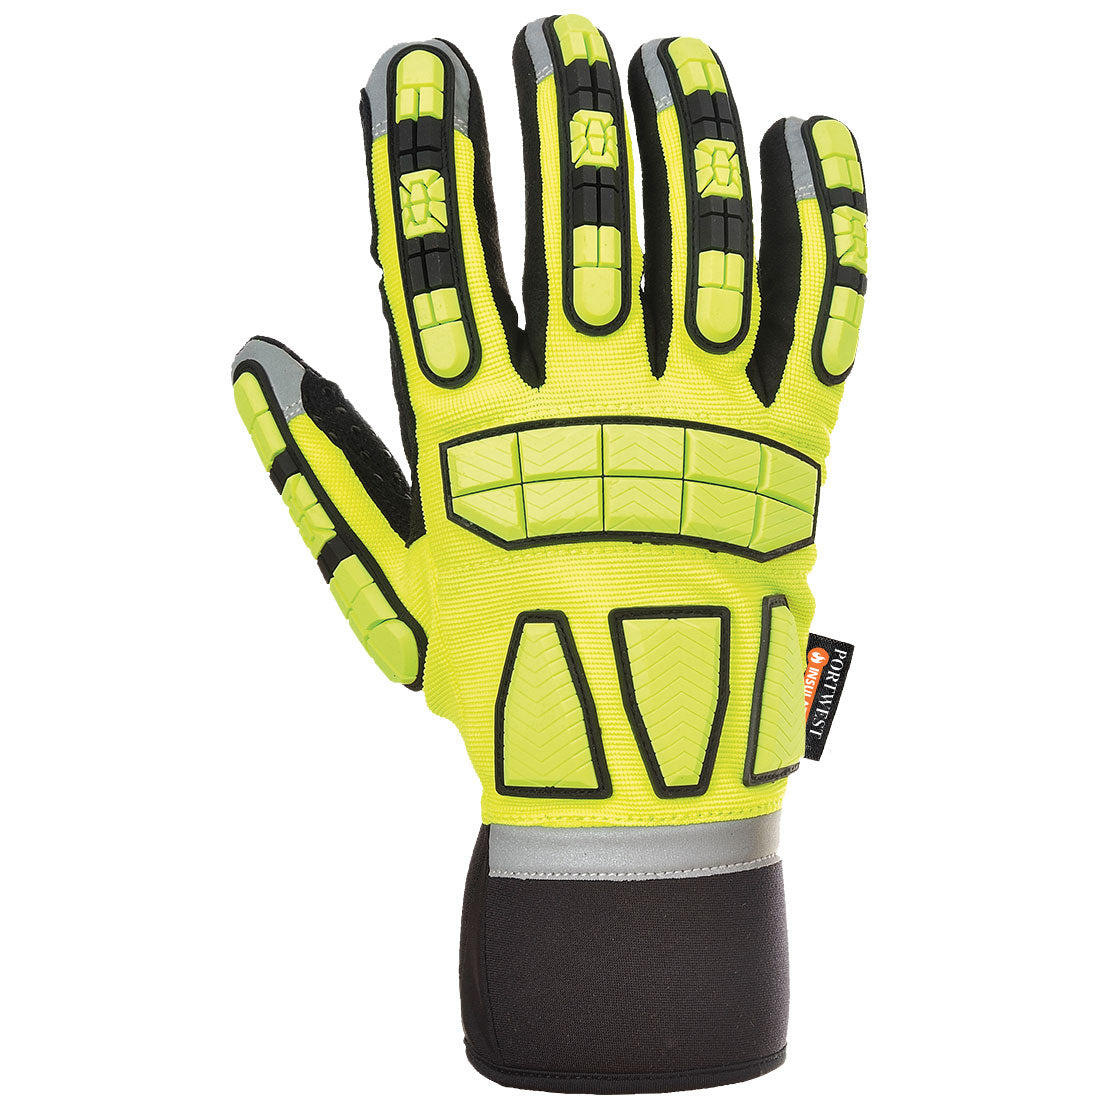 Portwest Safety Impact Glove Lined